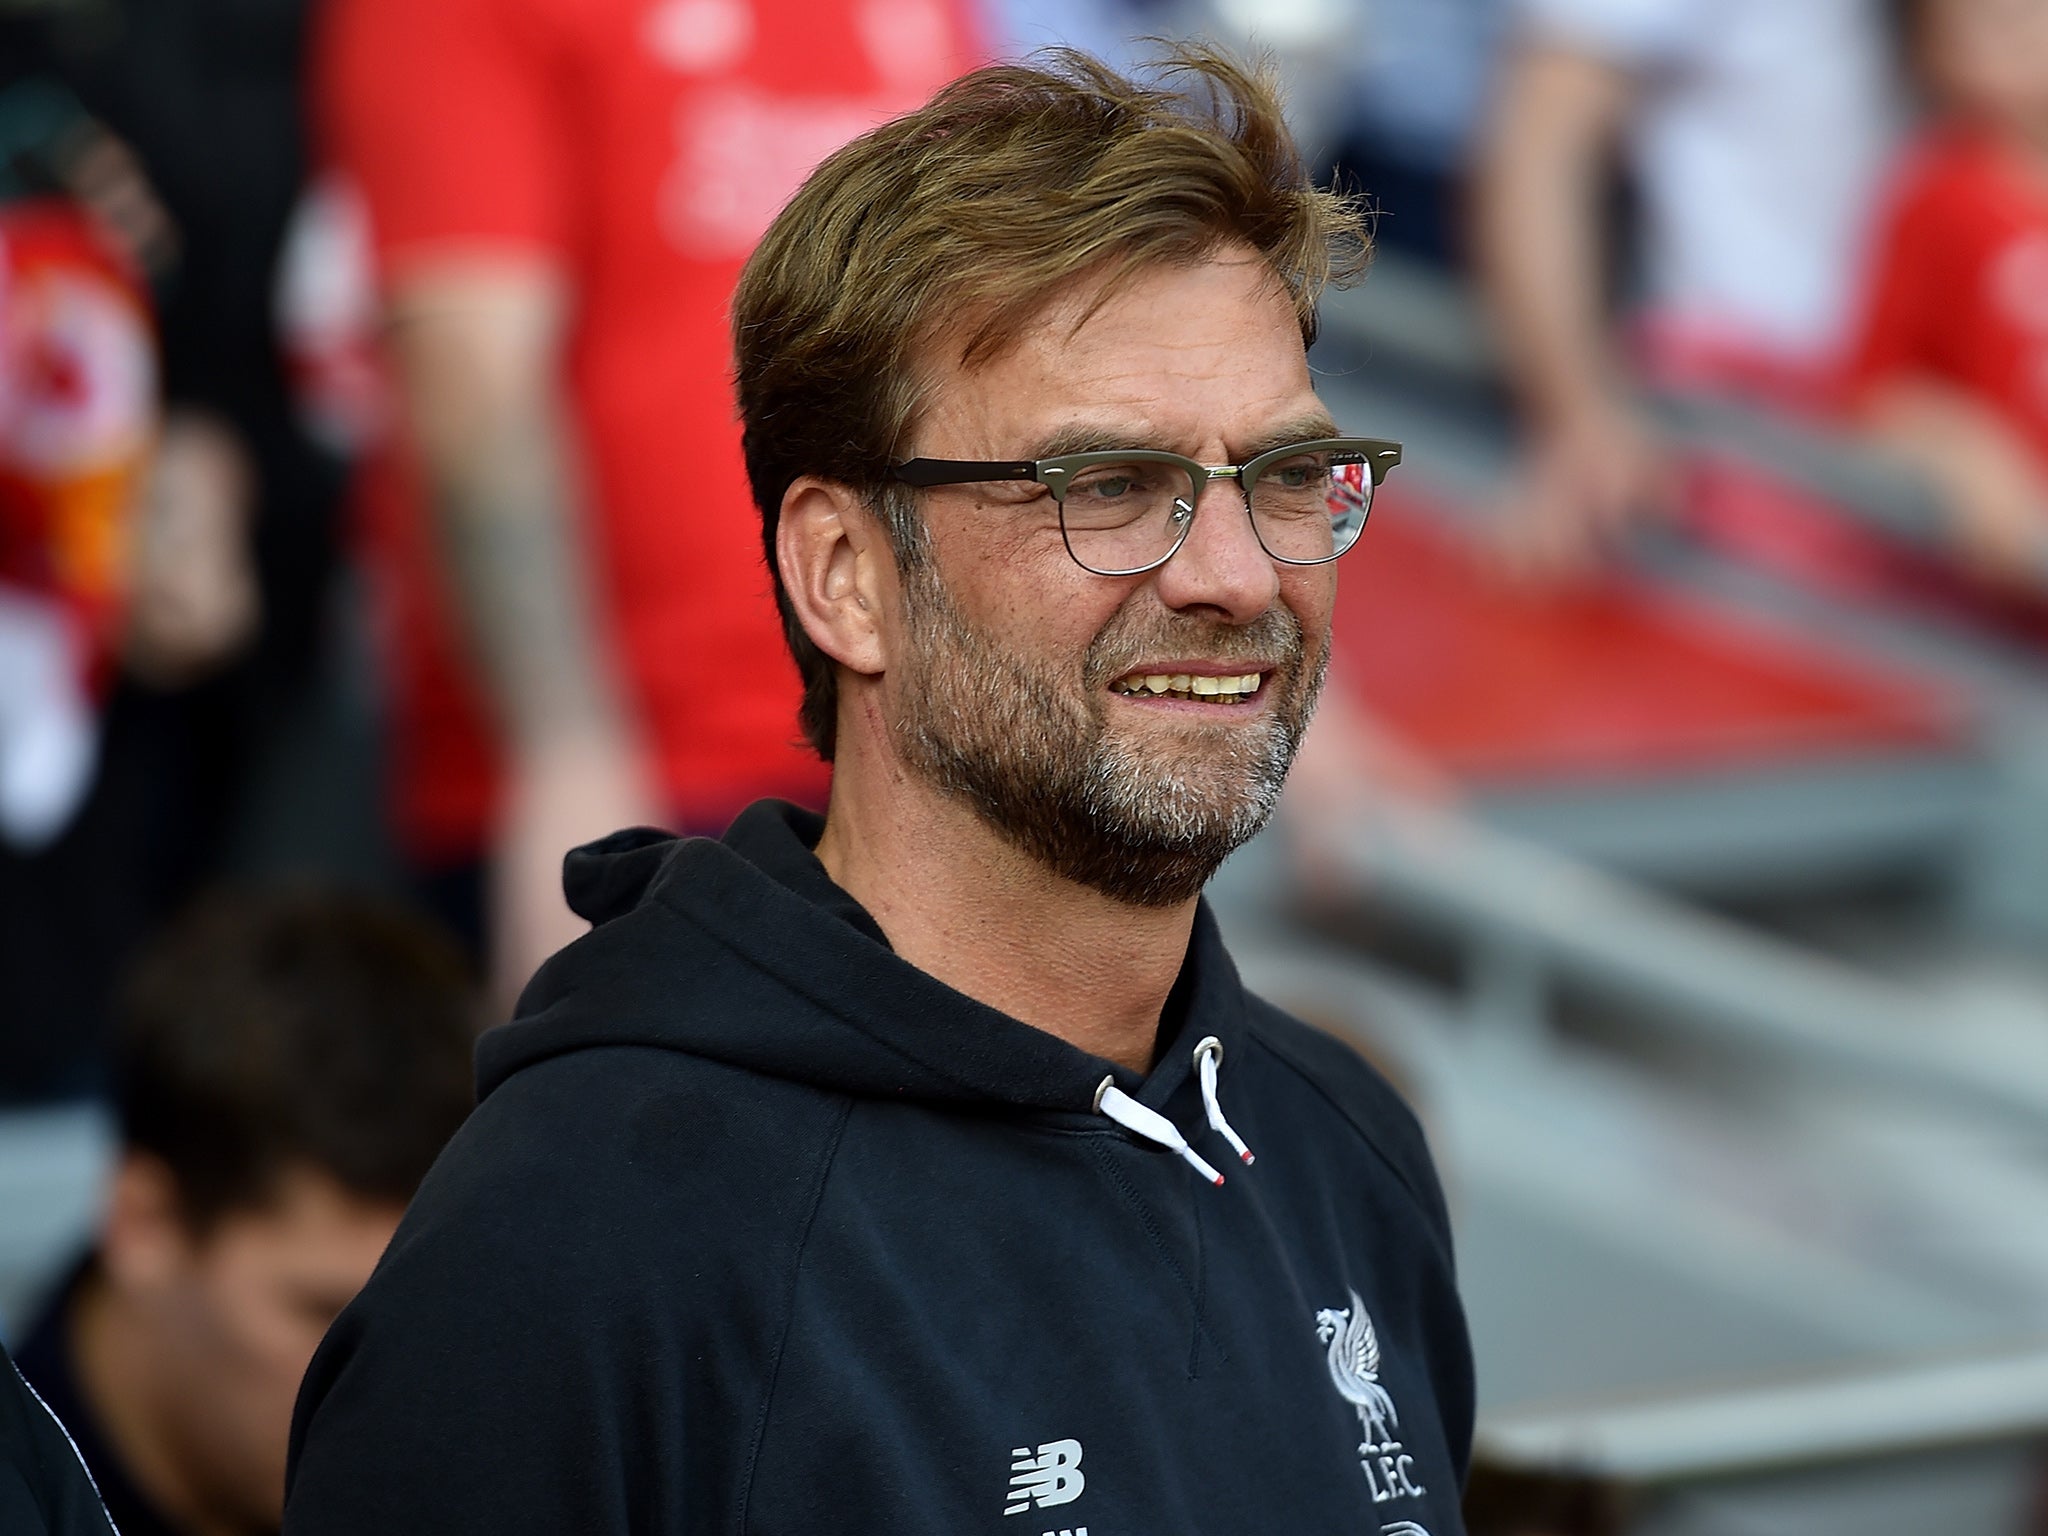 Klopp has admitted that he made a mistake by inviting fans en masse